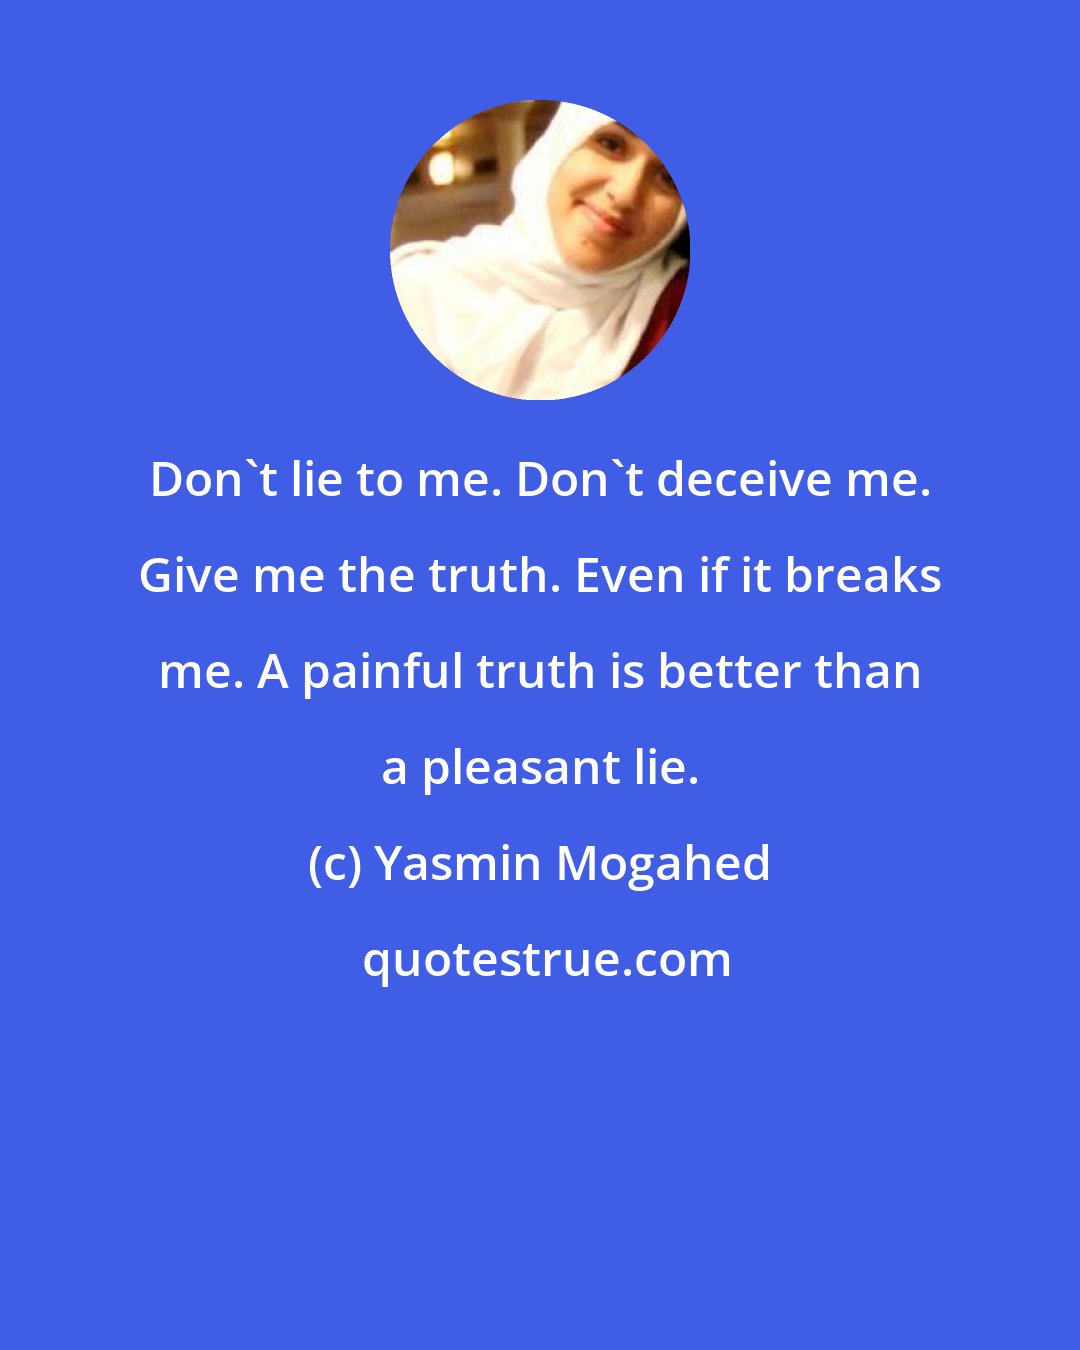 Yasmin Mogahed: Don't lie to me. Don't deceive me. Give me the truth. Even if it breaks me. A painful truth is better than a pleasant lie.